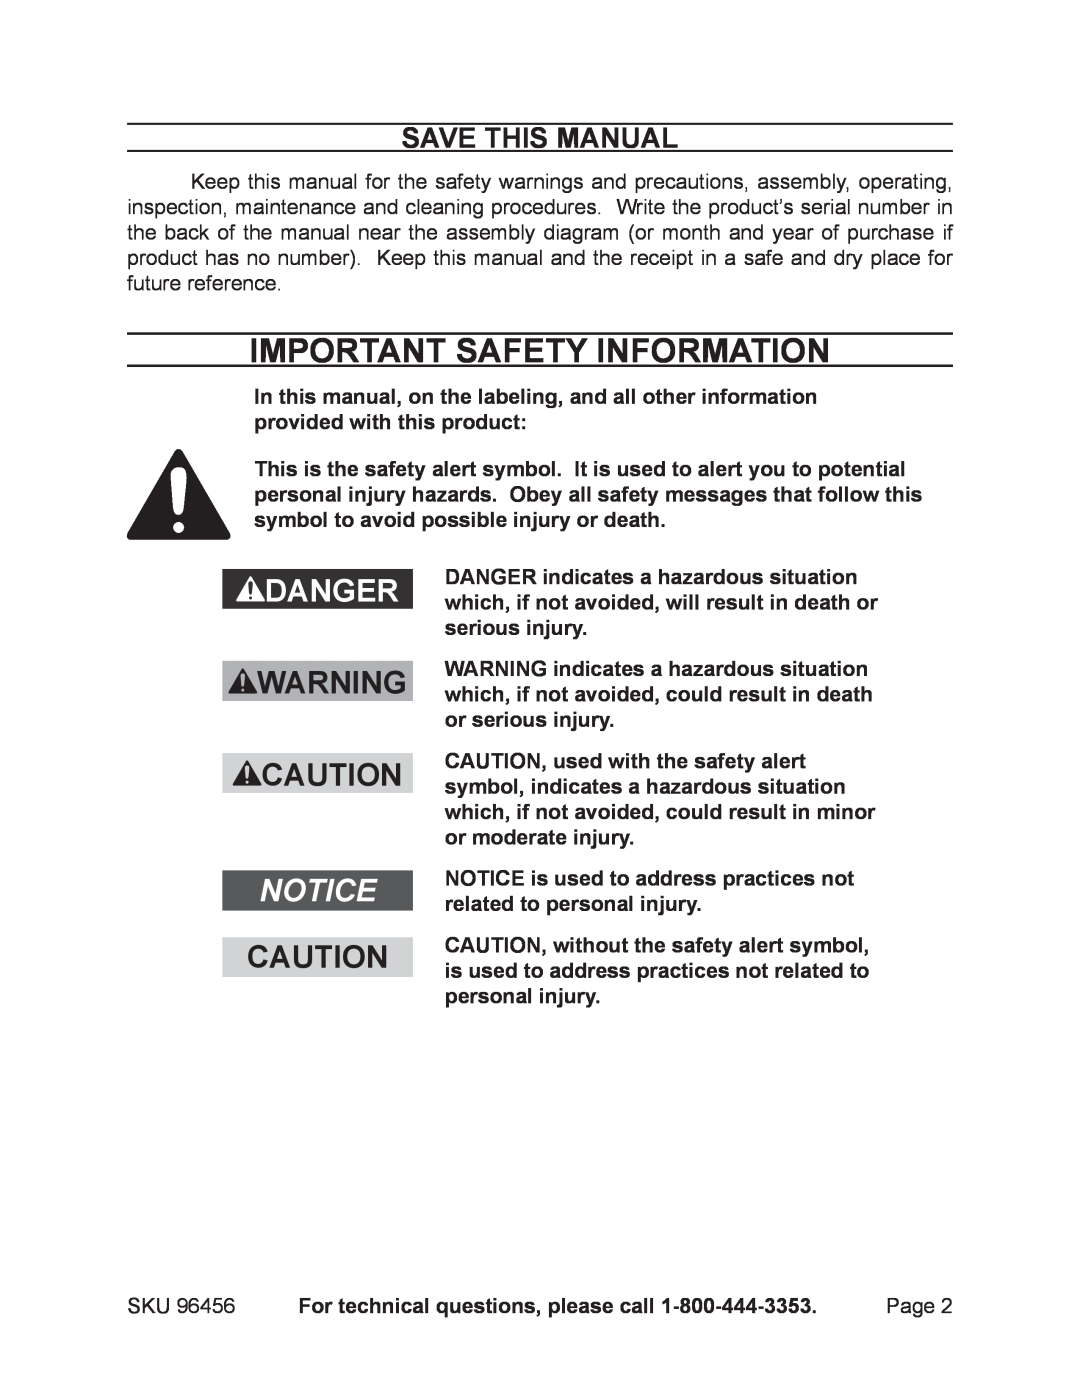 Harbor Freight Tools 96456 manual Important SAFETY Information, Save This Manual, Danger 